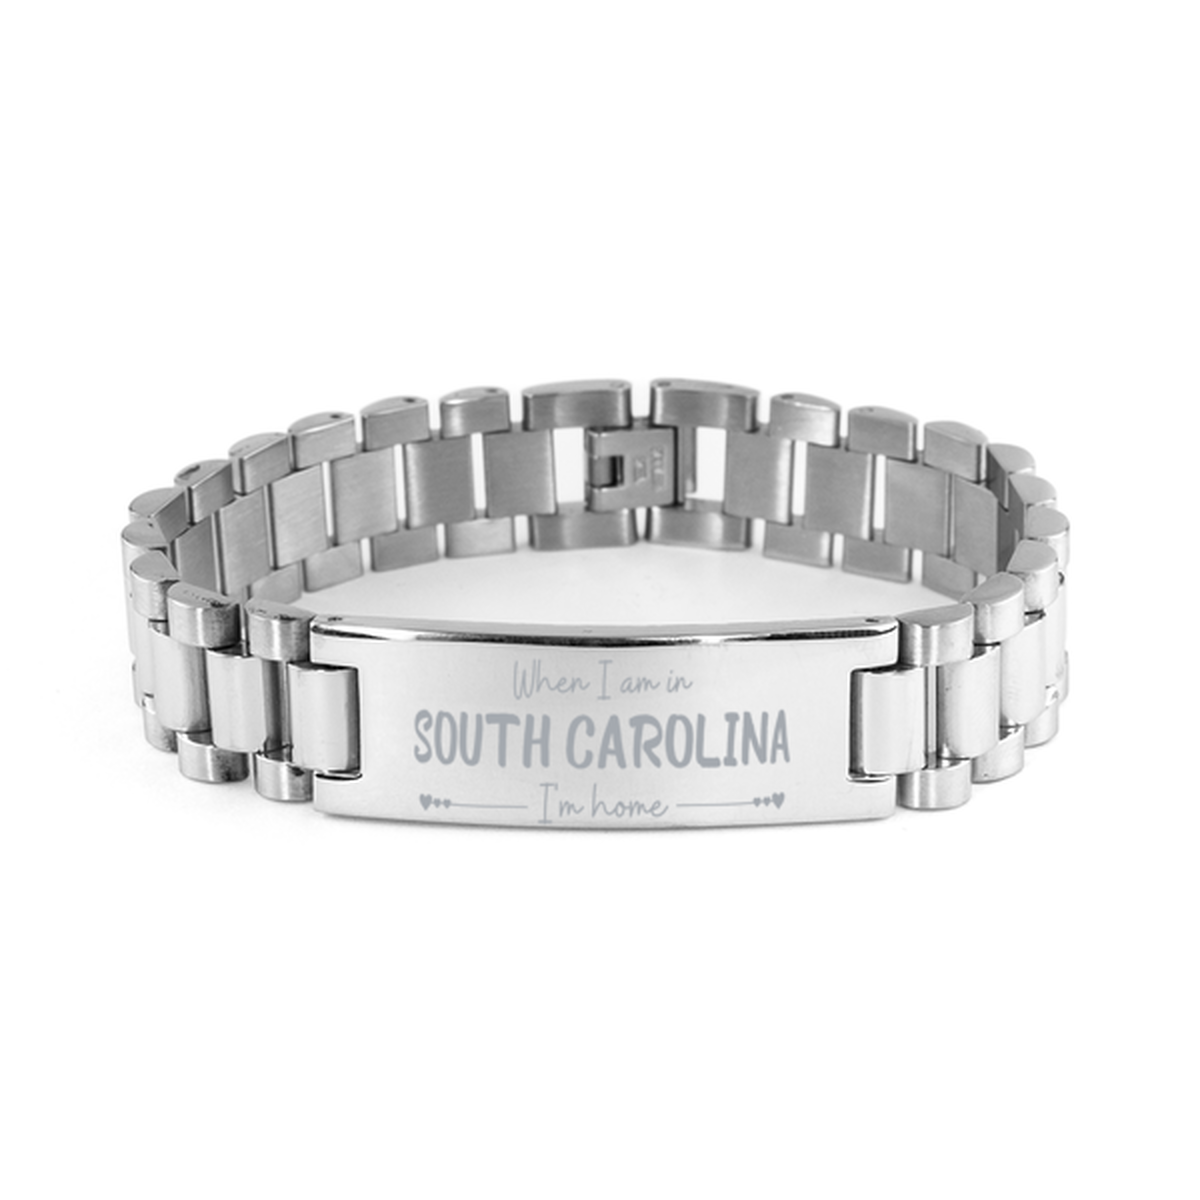 When I am in South Carolina I'm home Ladder Stainless Steel Bracelet, Cheap Gifts For South Carolina, State South Carolina Birthday Gifts for Friends Coworker